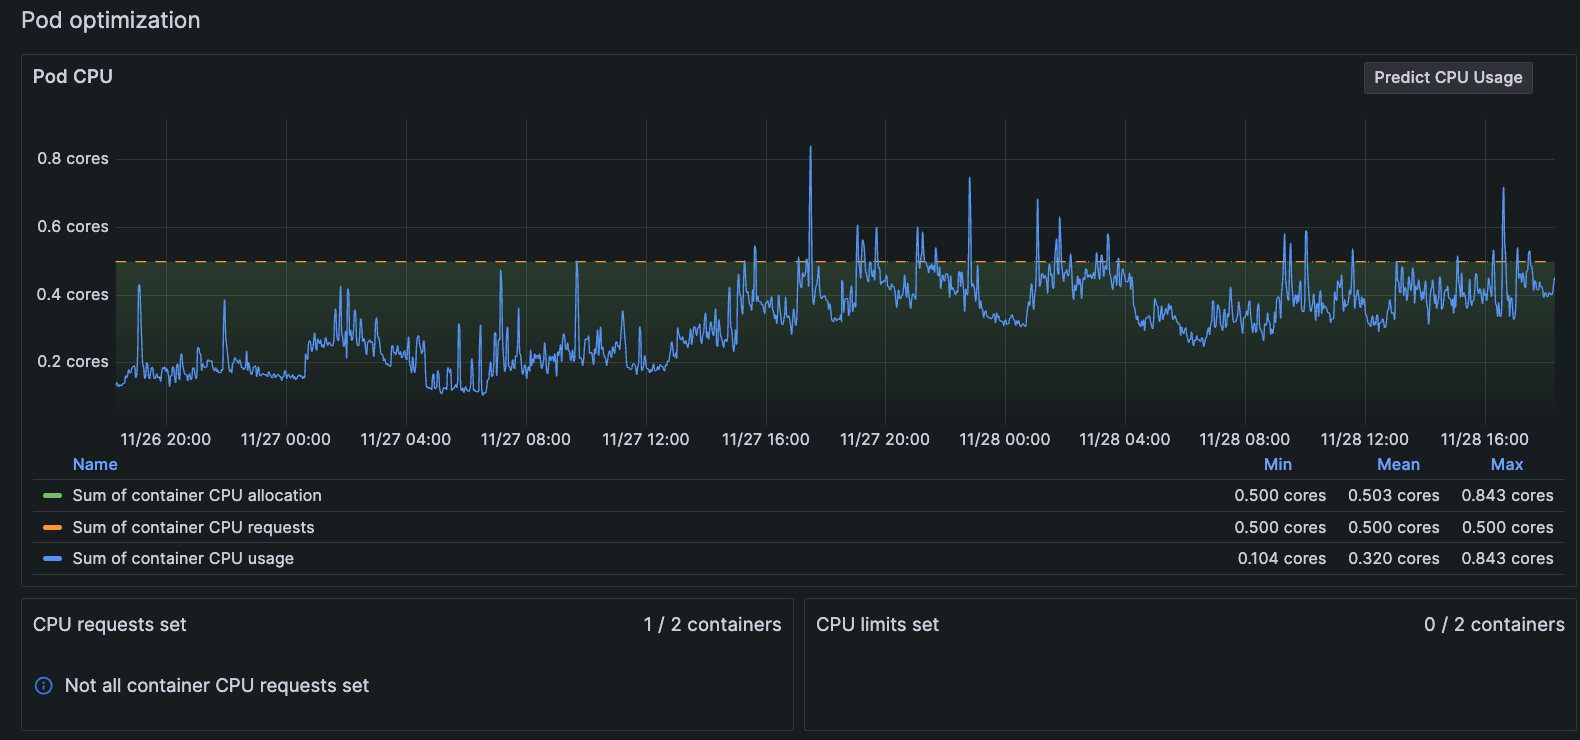 Graph of Pod CPU usage bursting above the line for CPU limits for two-day period